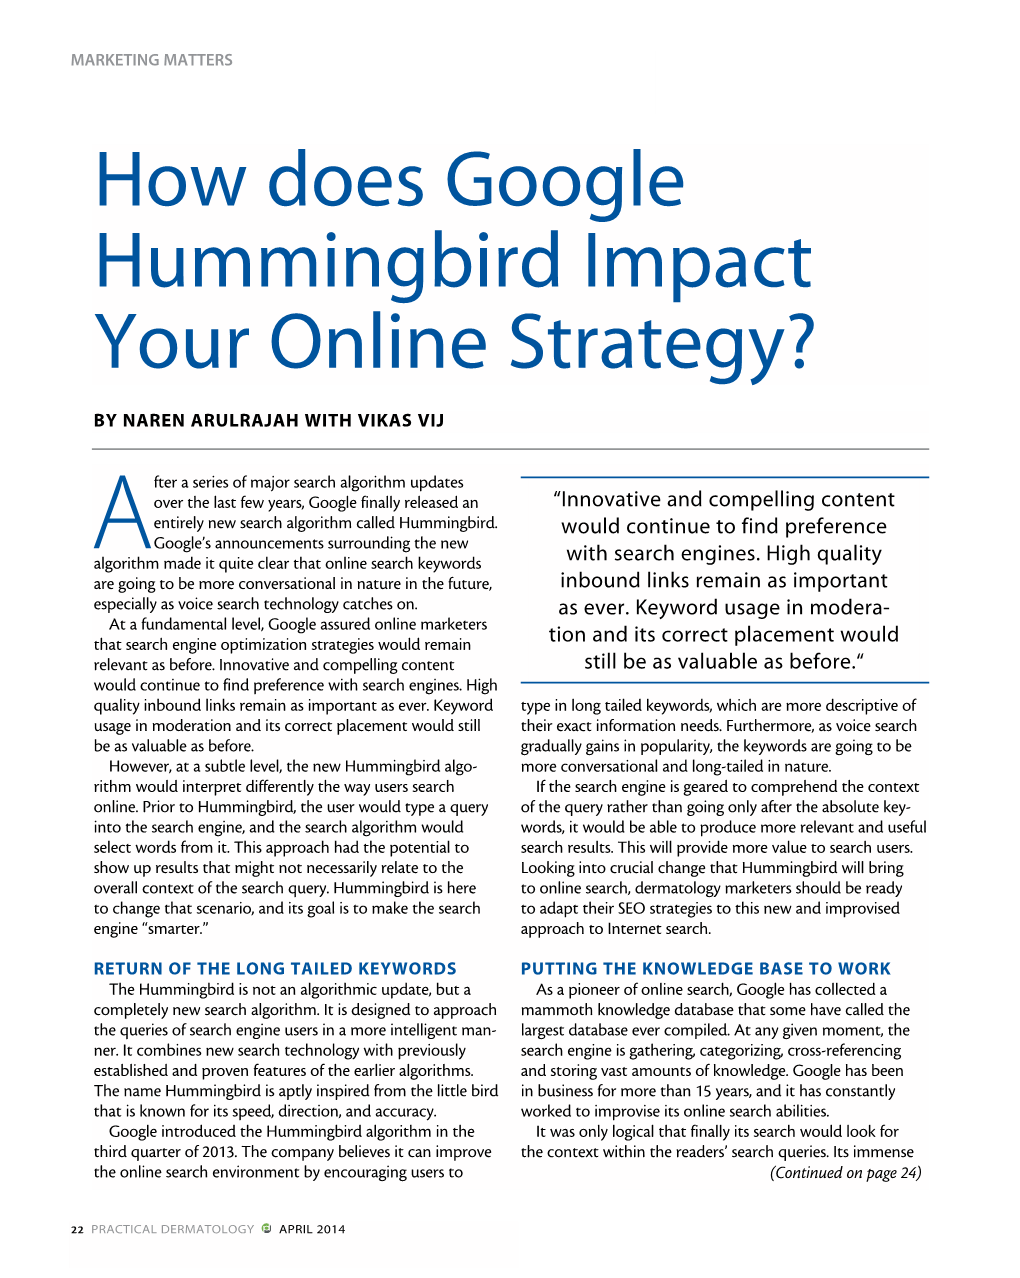 How Does Google Hummingbird Impact Your Online Strategy?